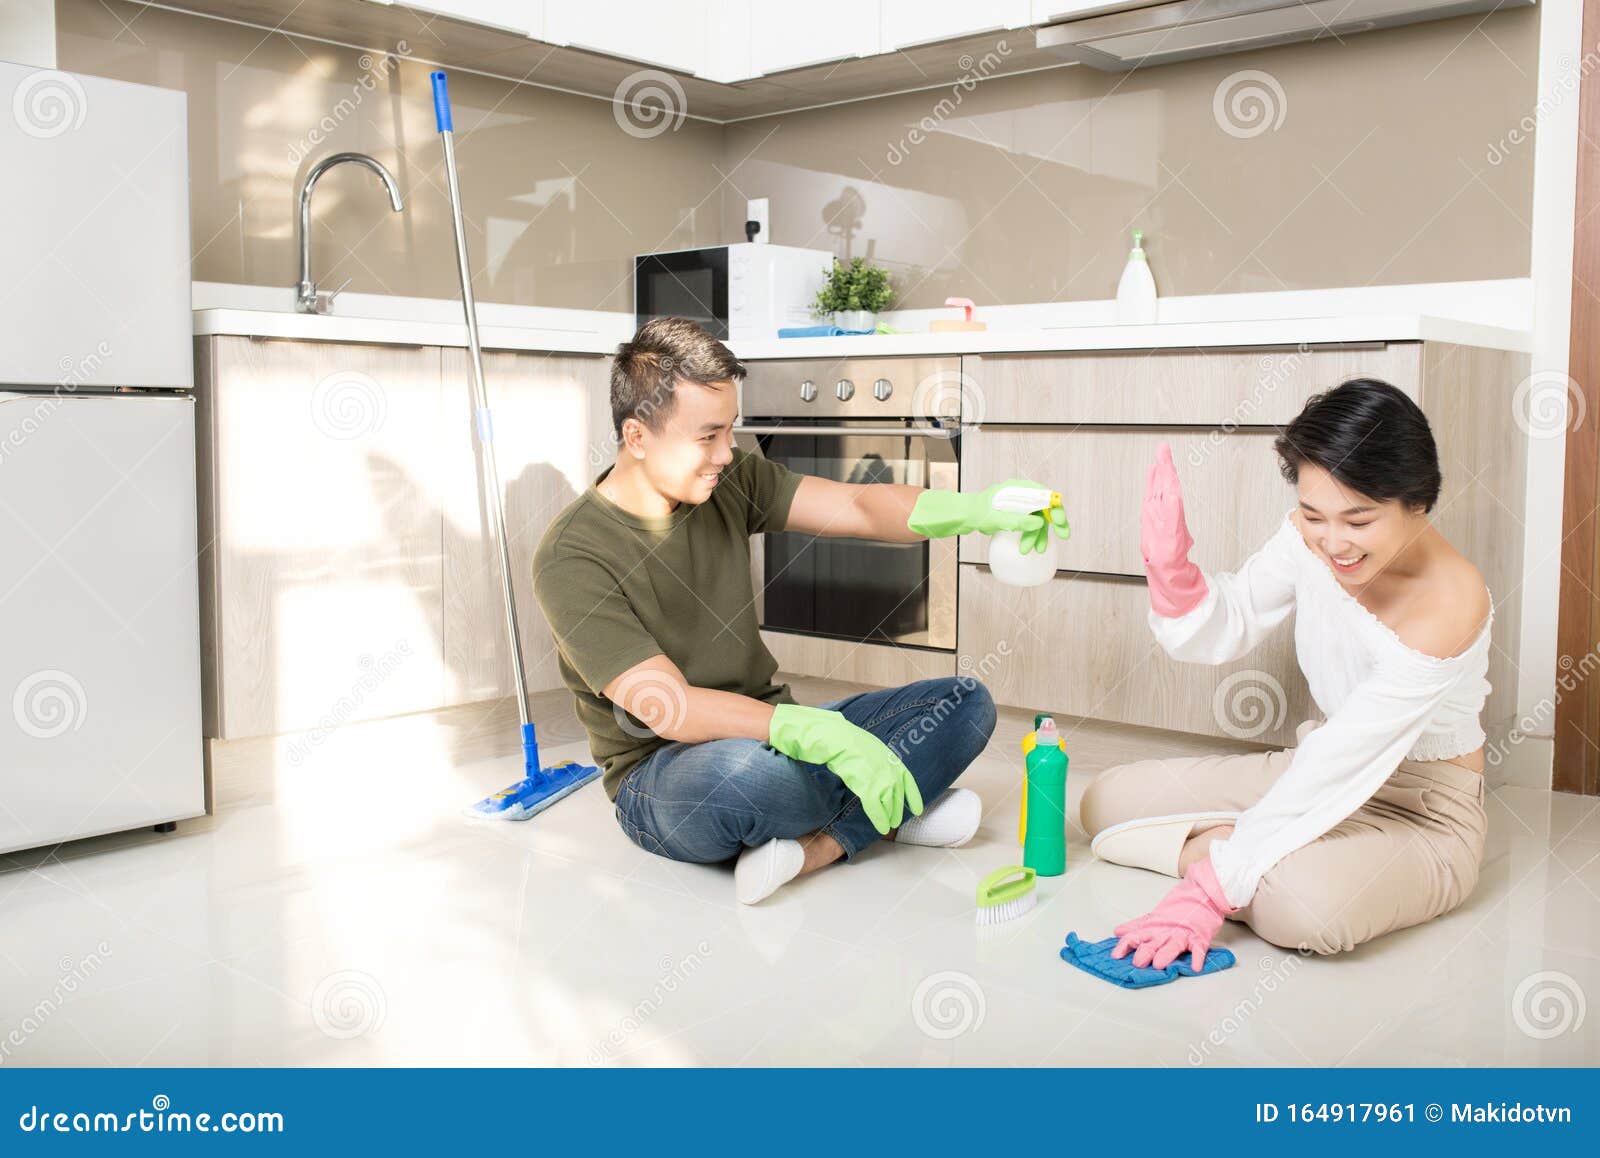 Modern Kitchen Smiling Young Asian Woman And Man Cleaning The Floor